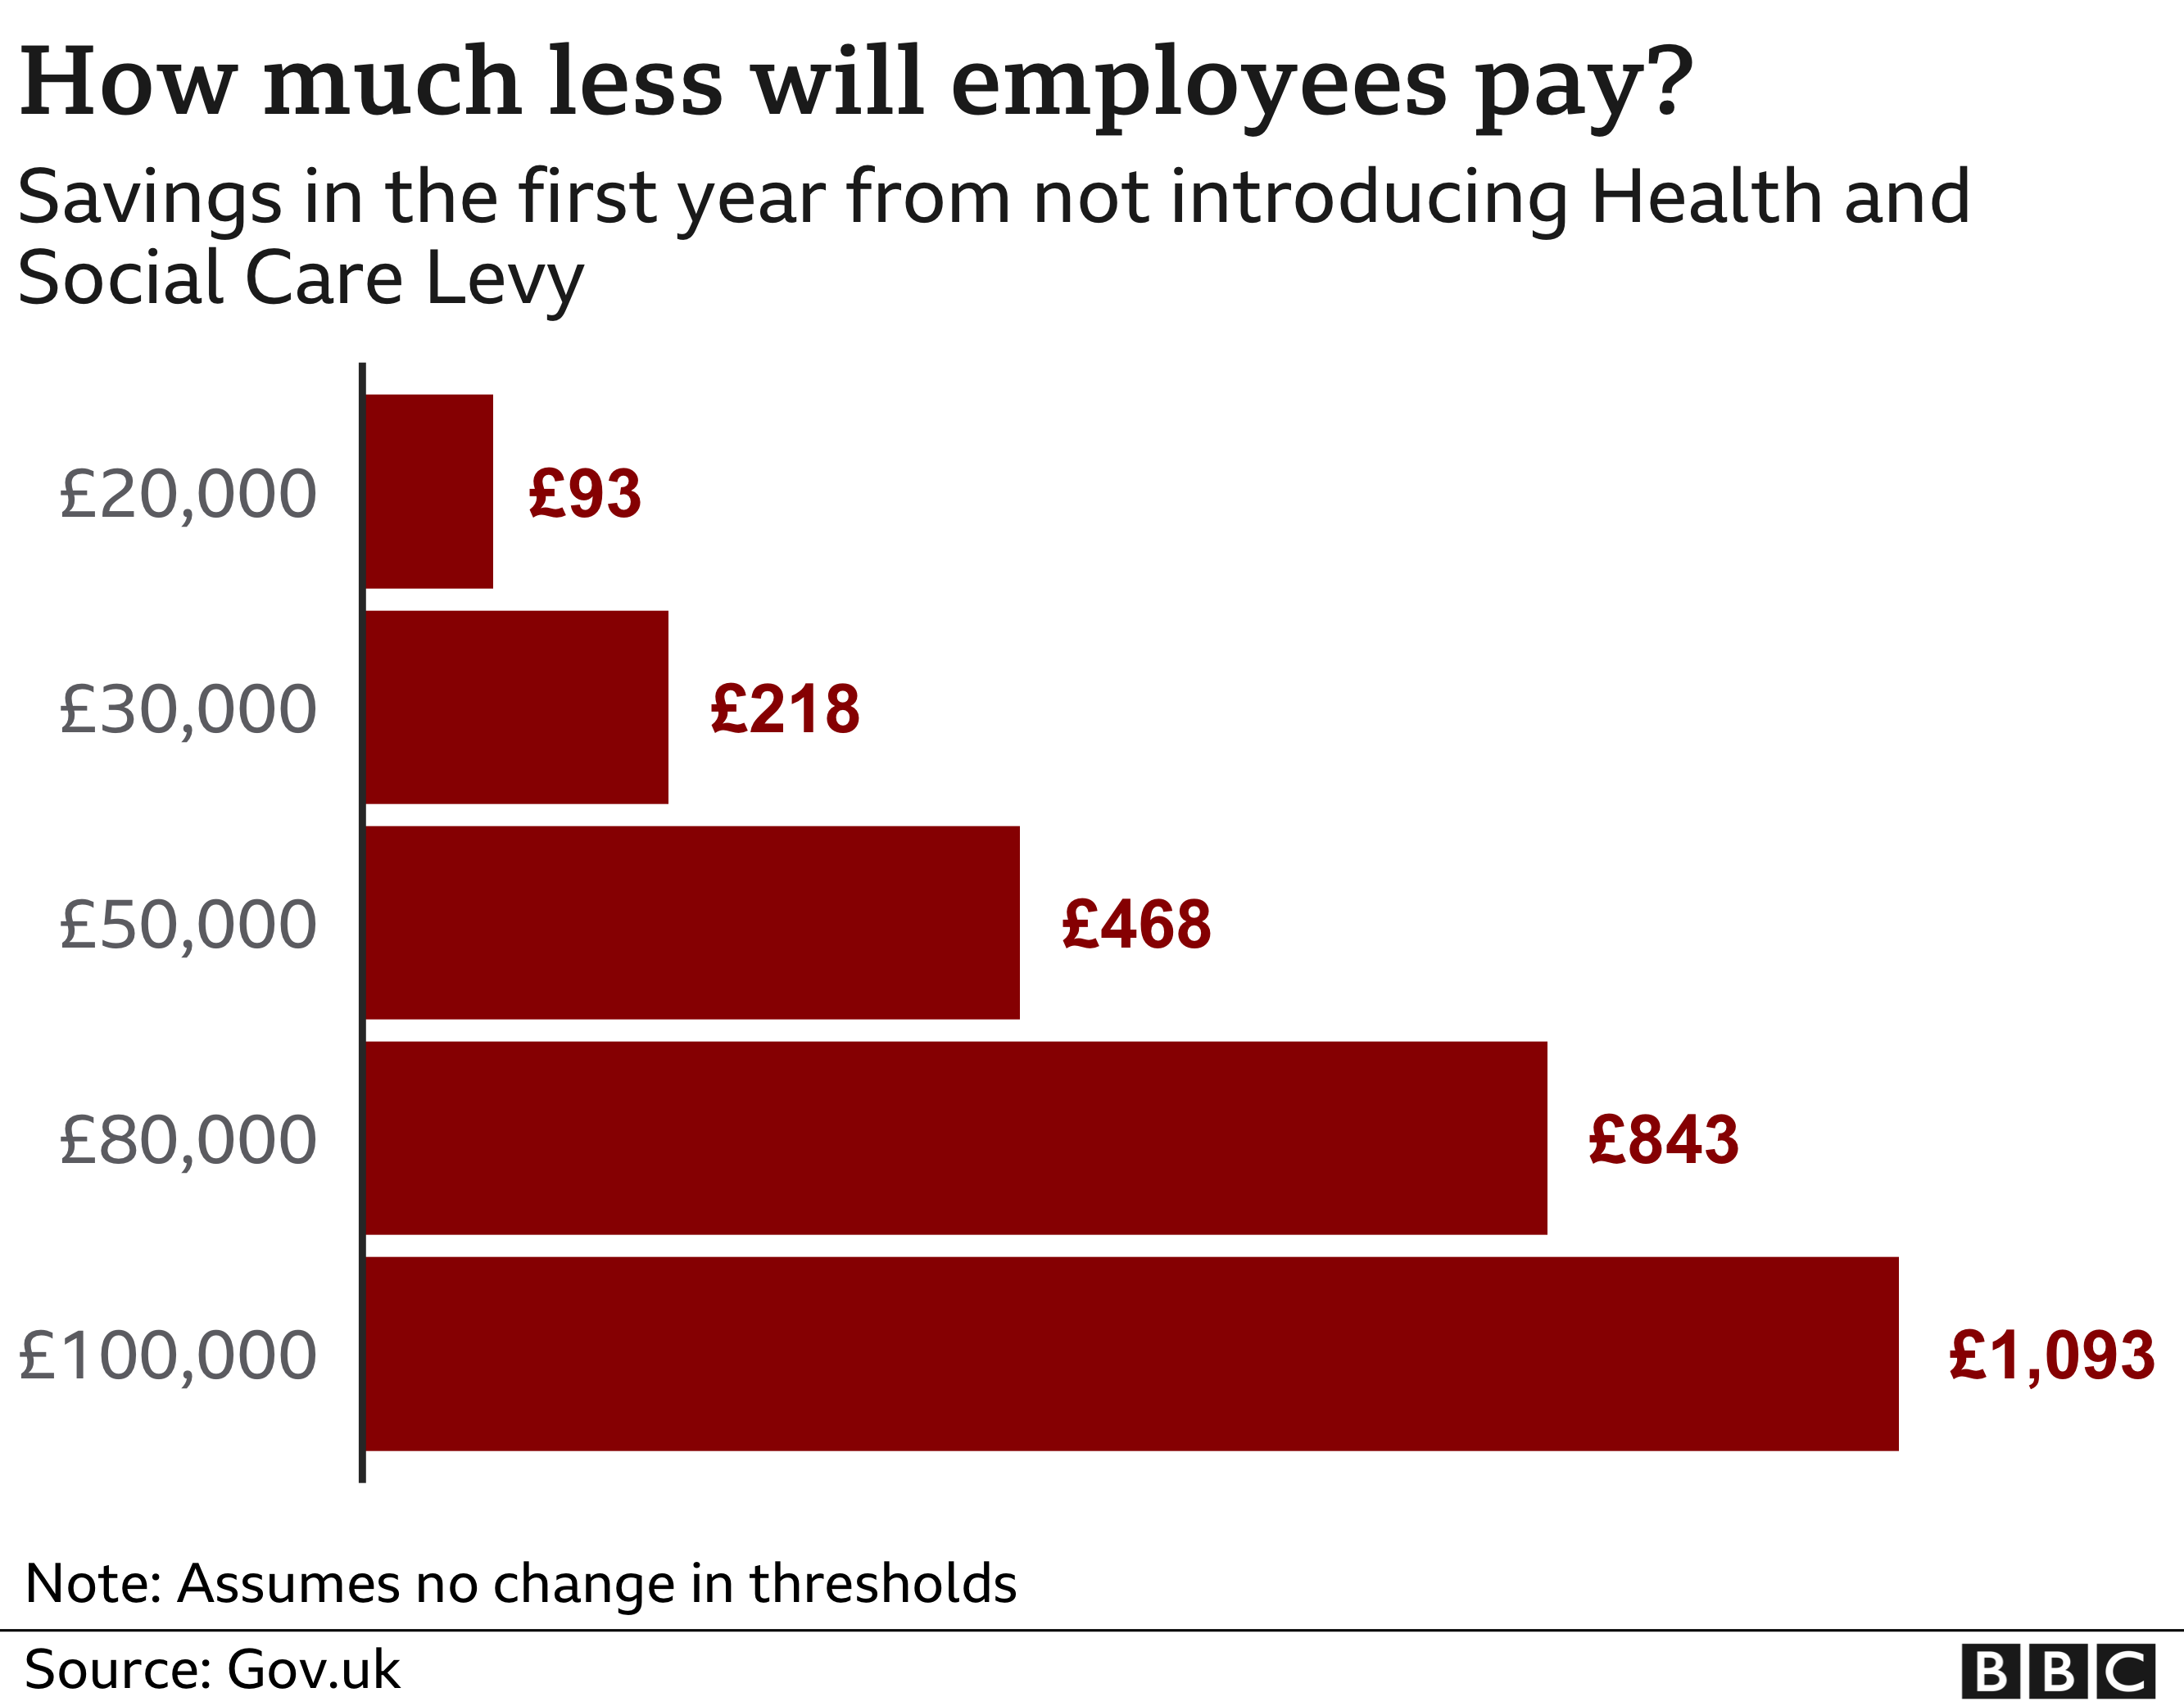 Chart showing money saved by employees in first year by not introducing health and social care levy